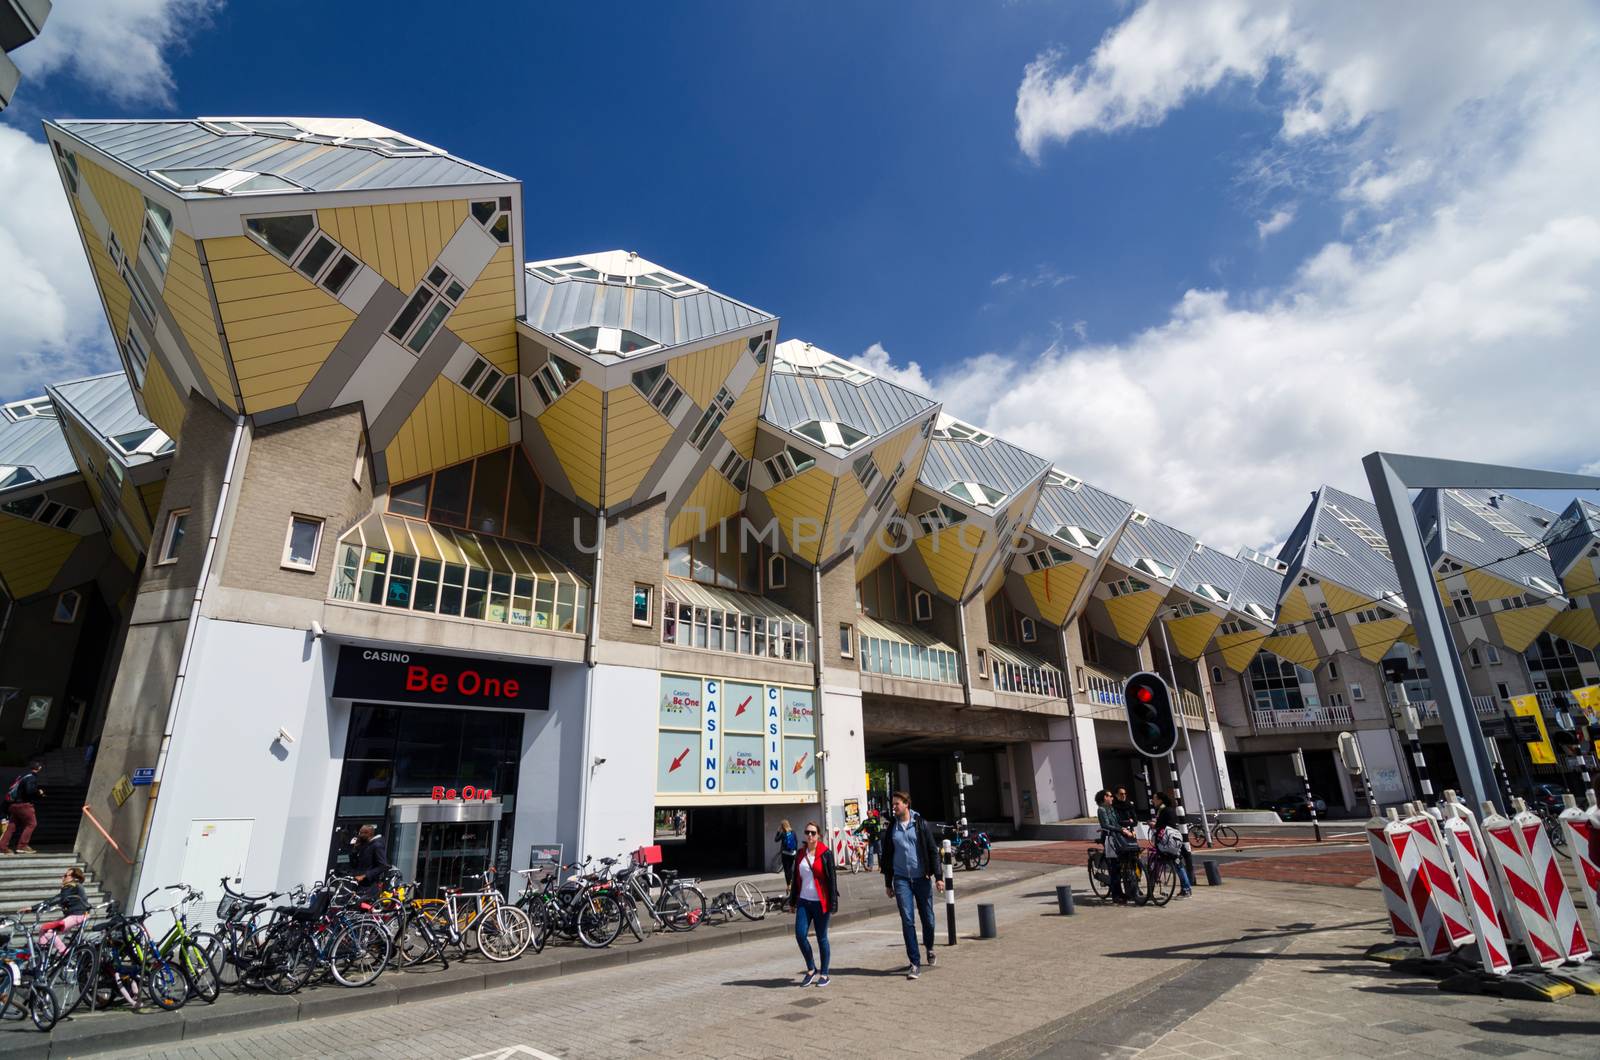 Rotterdam, Netherlands - May 9, 2015: People around Cube Houses the iconic in Rotterdam. Cube Houses are a set of innovative houses built in Rotterdam and Helmond in the Netherlands, designed by architect Piet Blom.